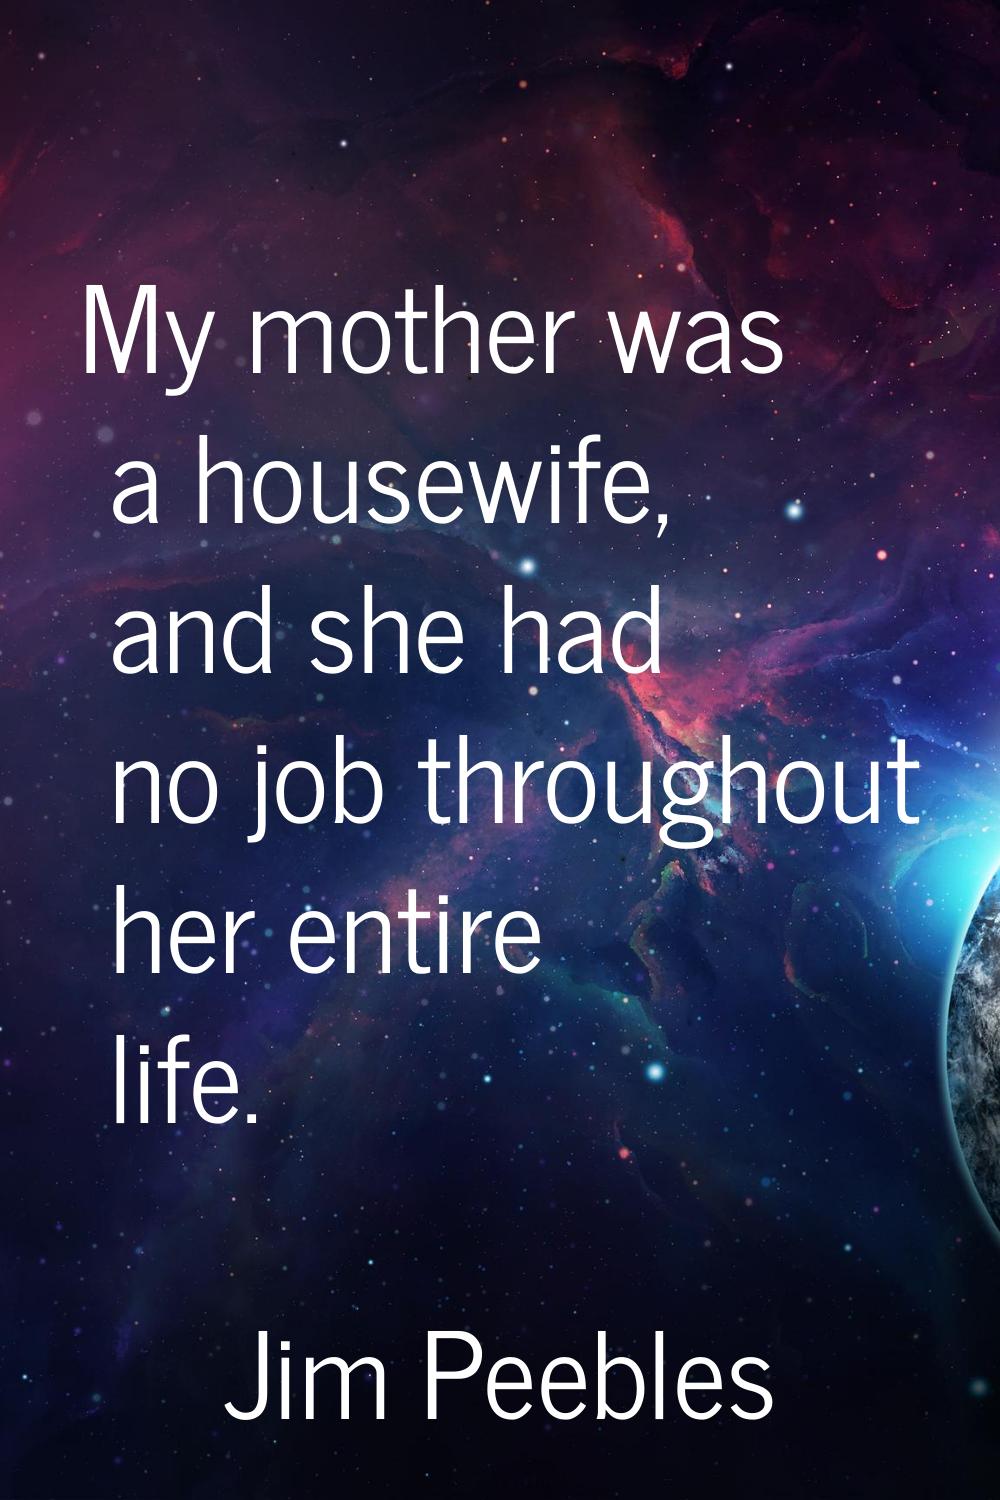 My mother was a housewife, and she had no job throughout her entire life.